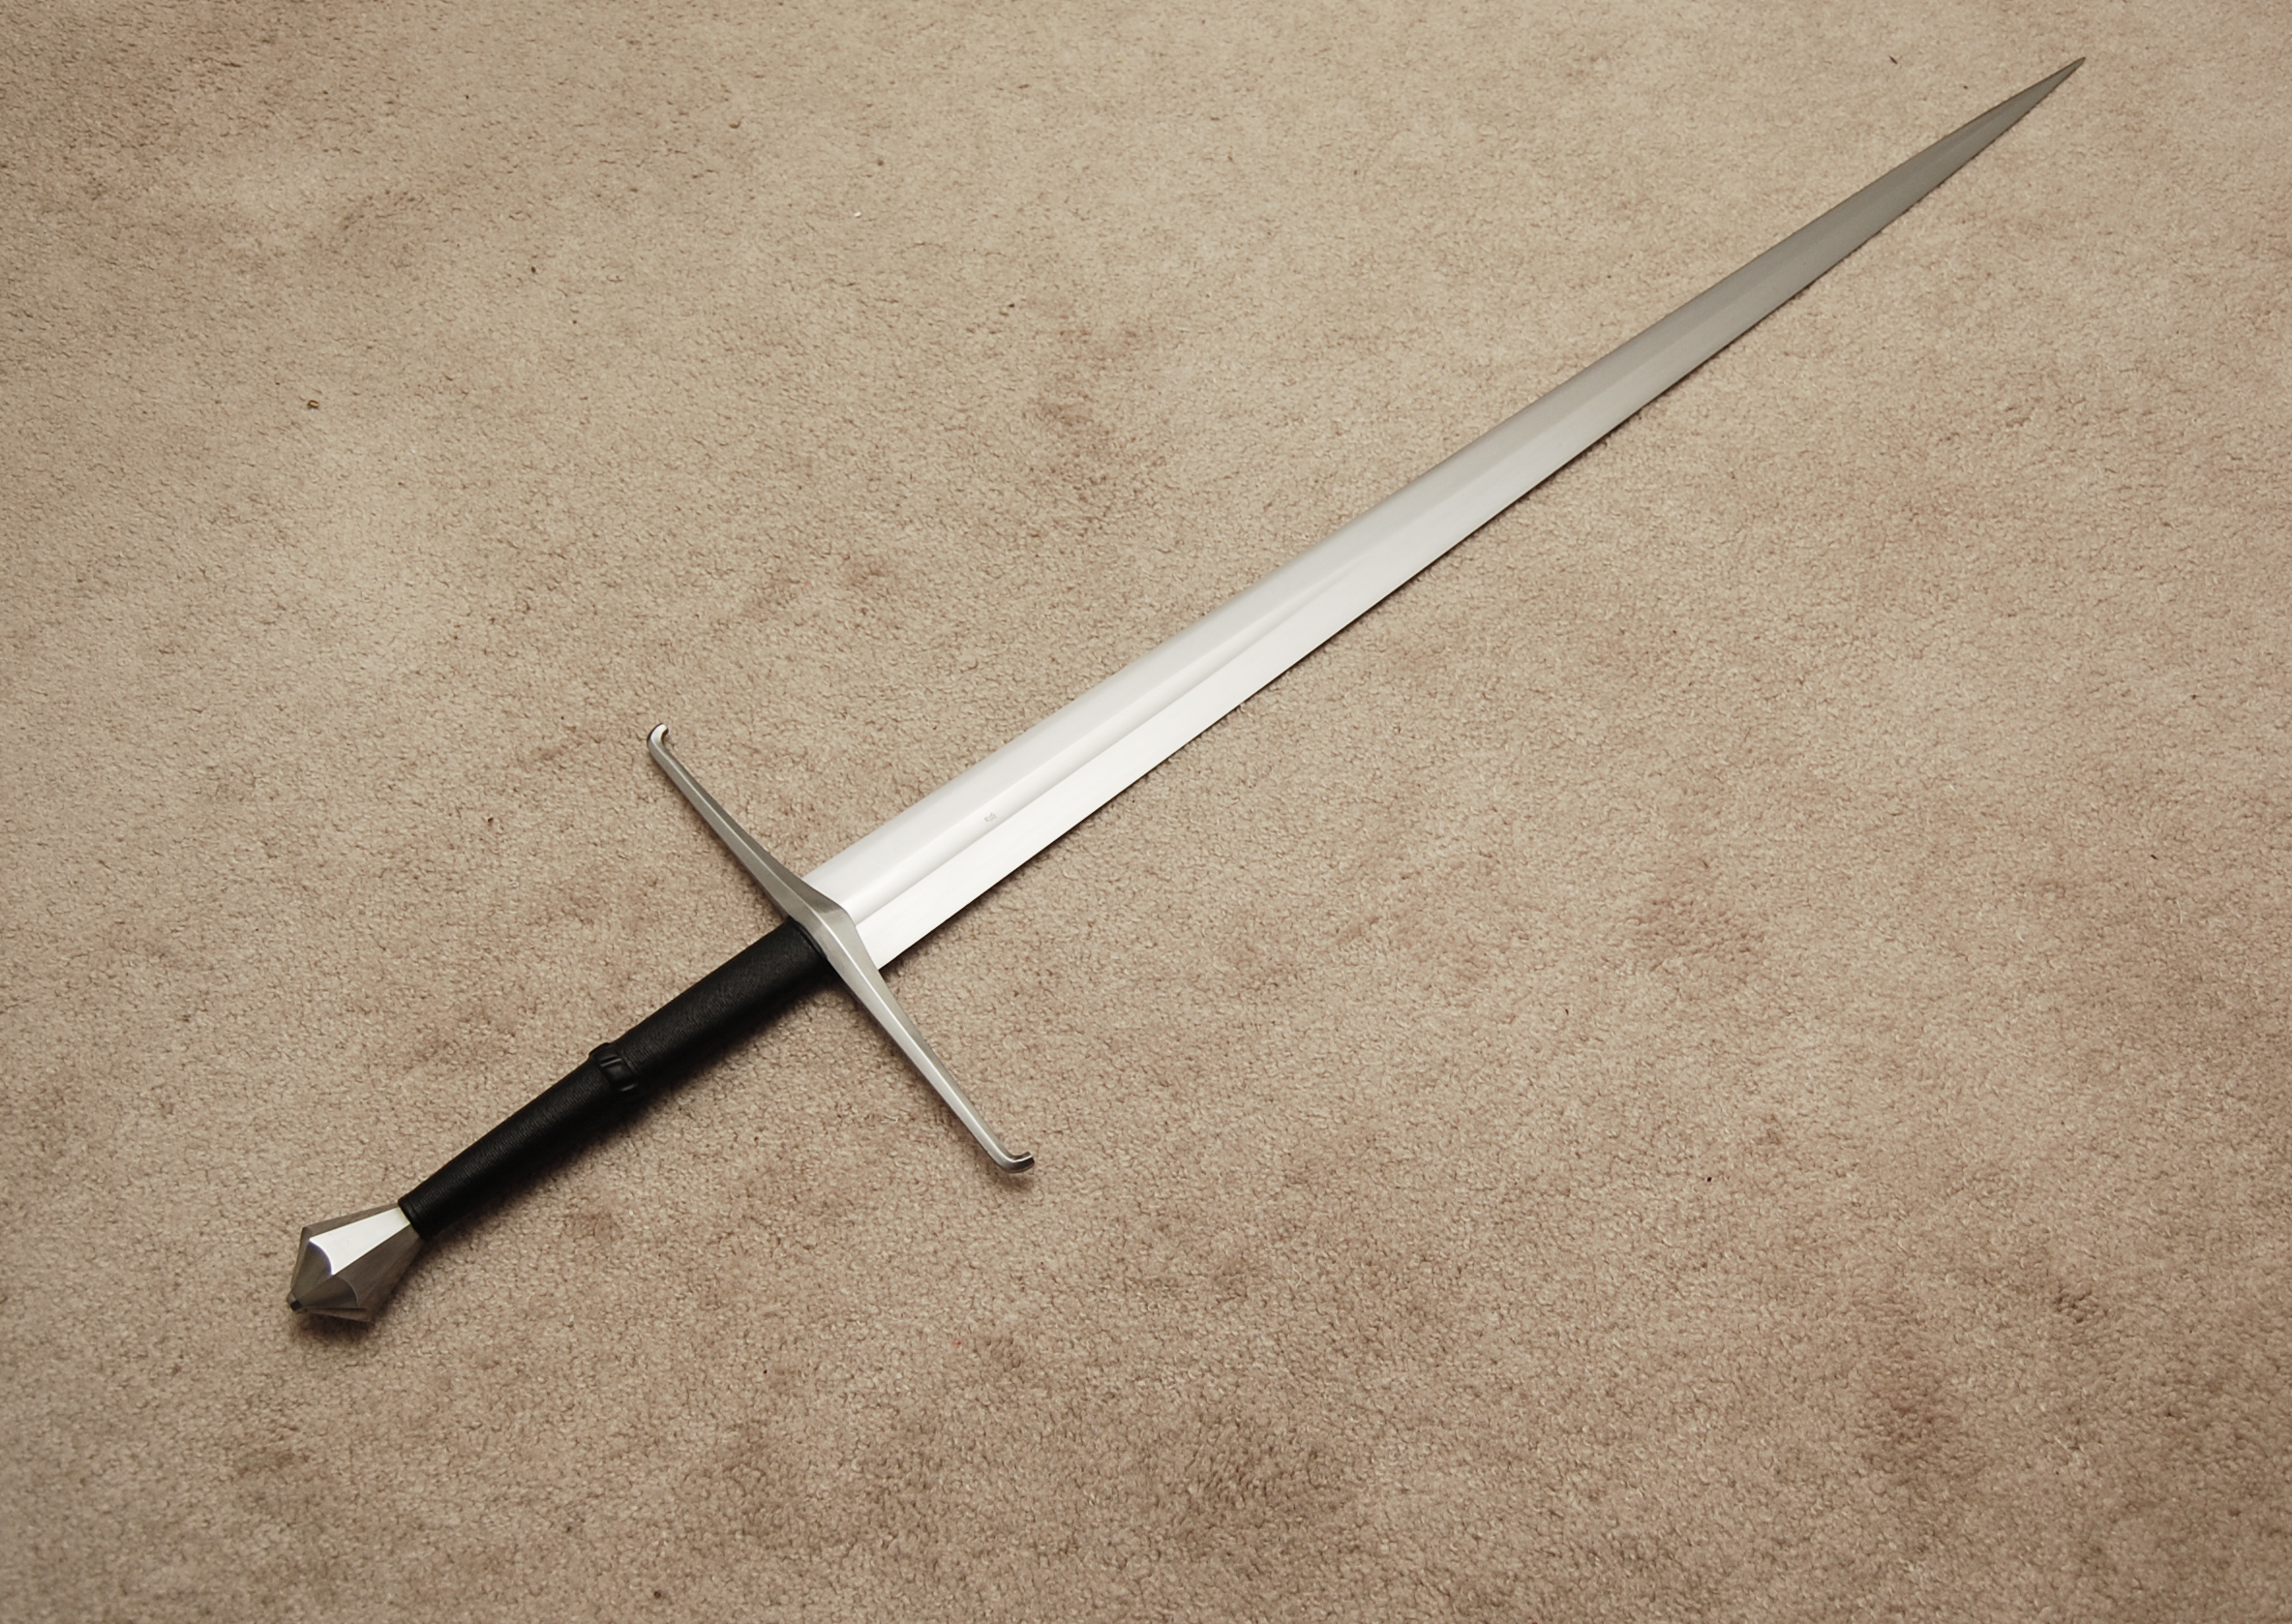 Reproduction of an early 15th century longsword, found in the Museo Civico L. Mazzoli, Brescia, Italy.